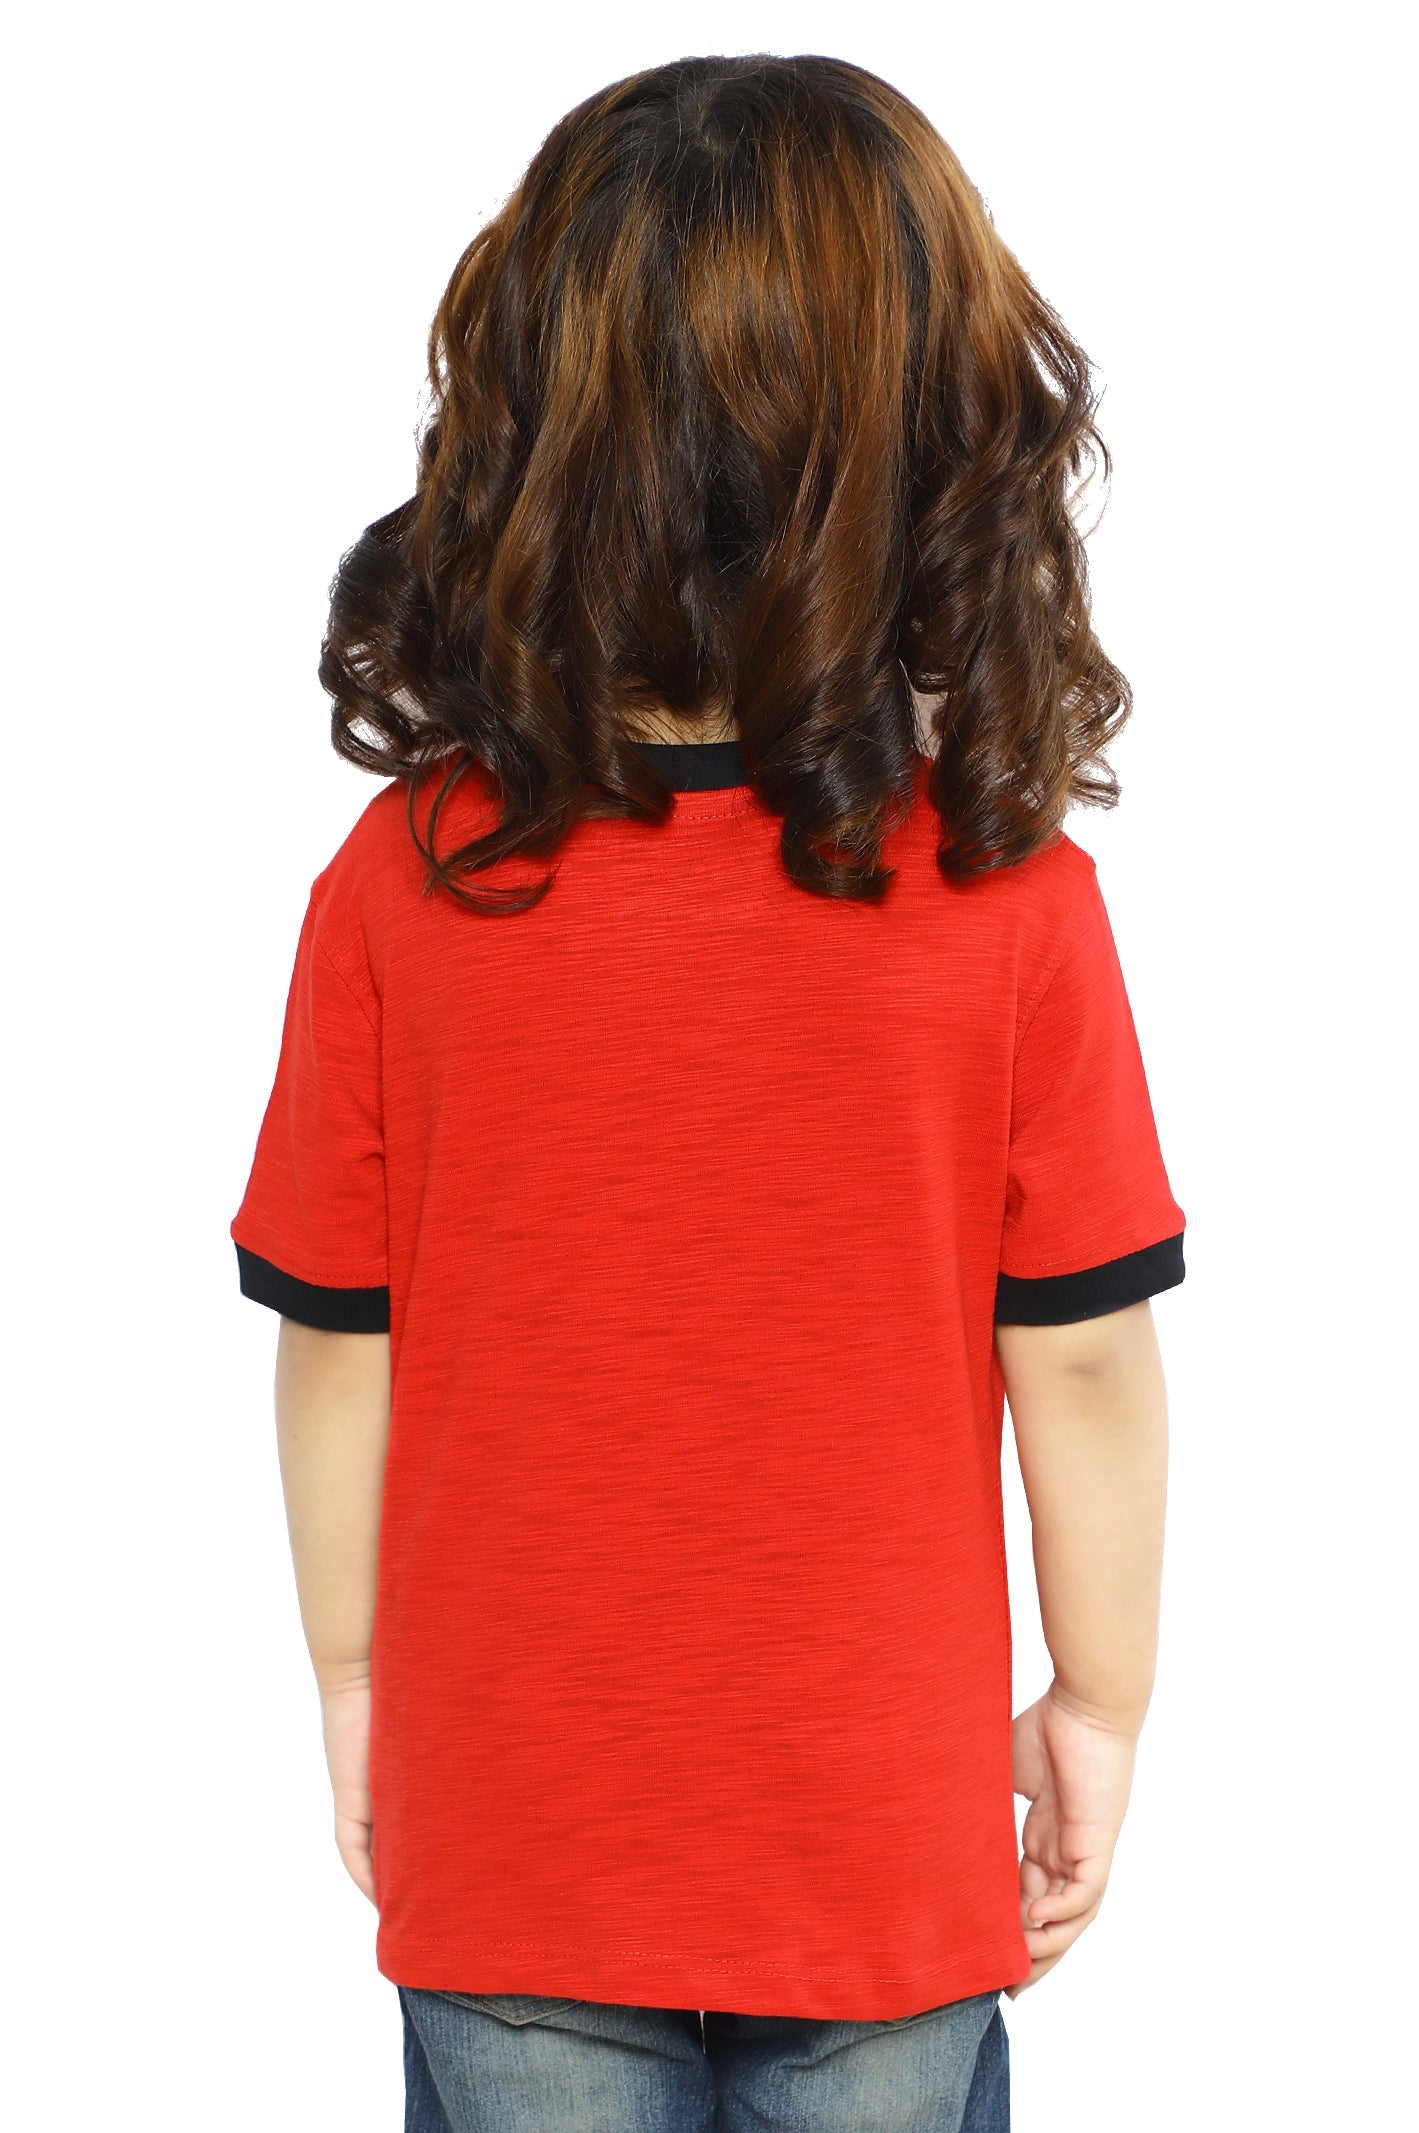 Girls T-Shirt In Red SKU: KGA-0237-RED - Diners